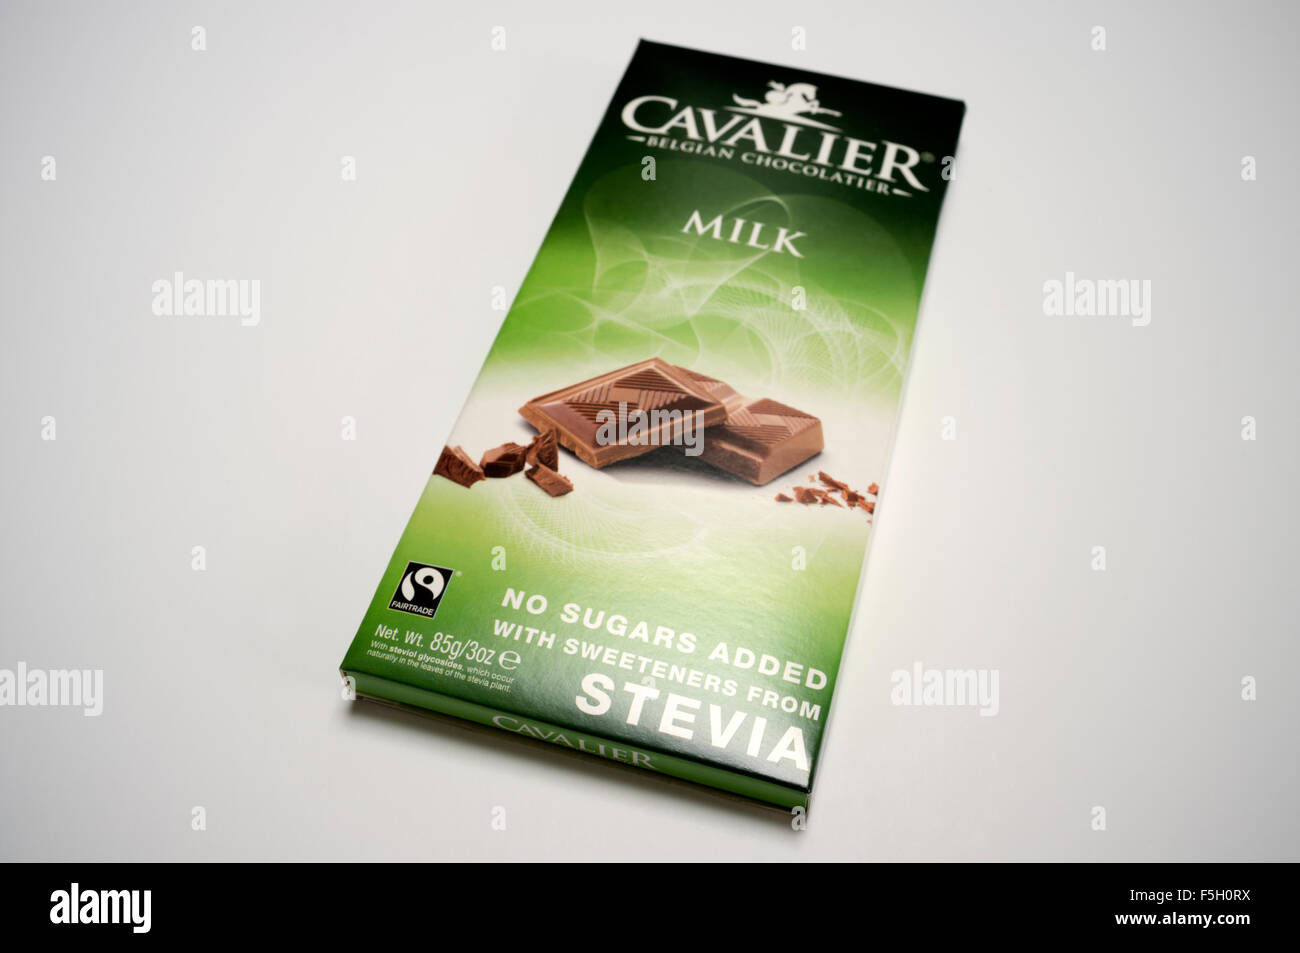 Cavalier milk chocolate with no added sugar and sweetened with Stevia Stock  Photo - Alamy